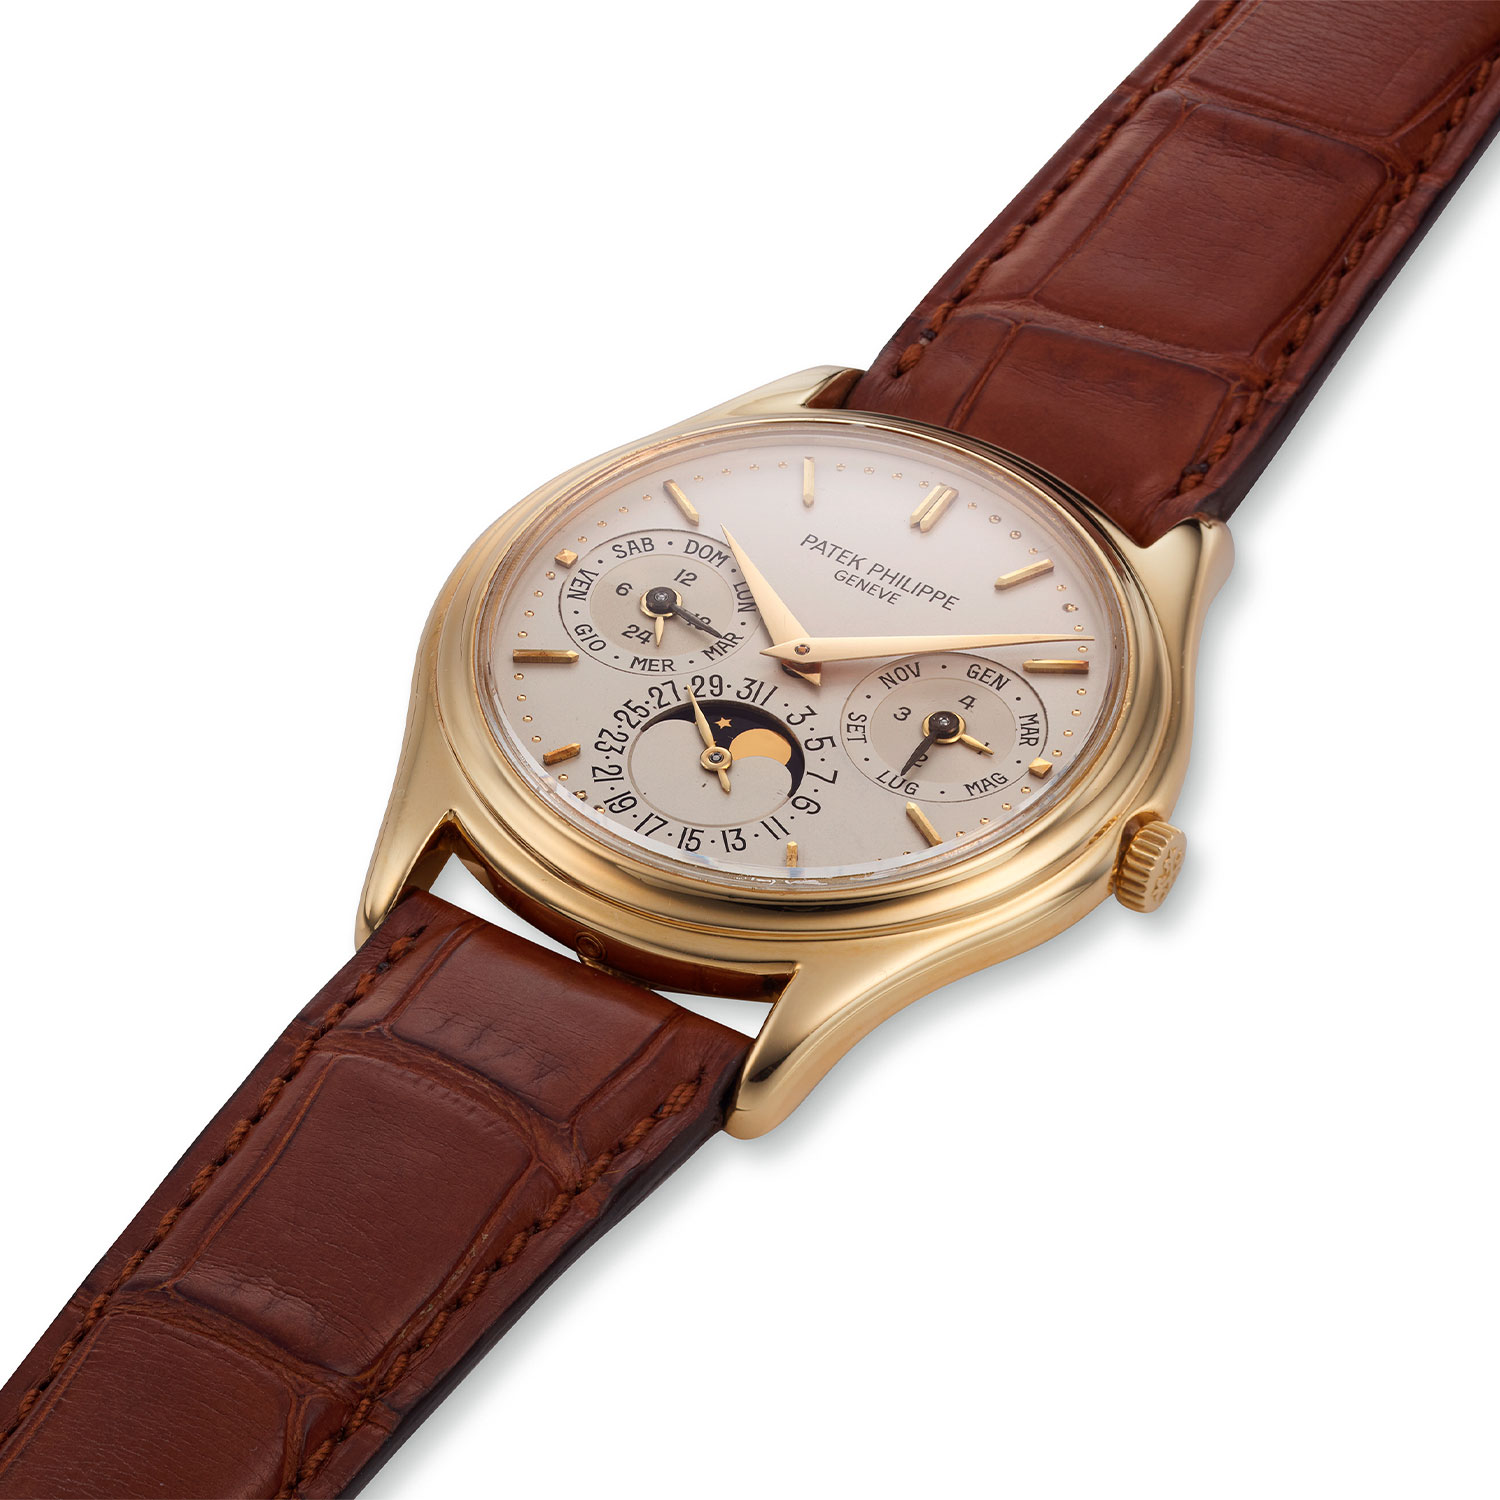 PATEK PHILIPPE YELLOW GOLD REF. 3940J - Collectability